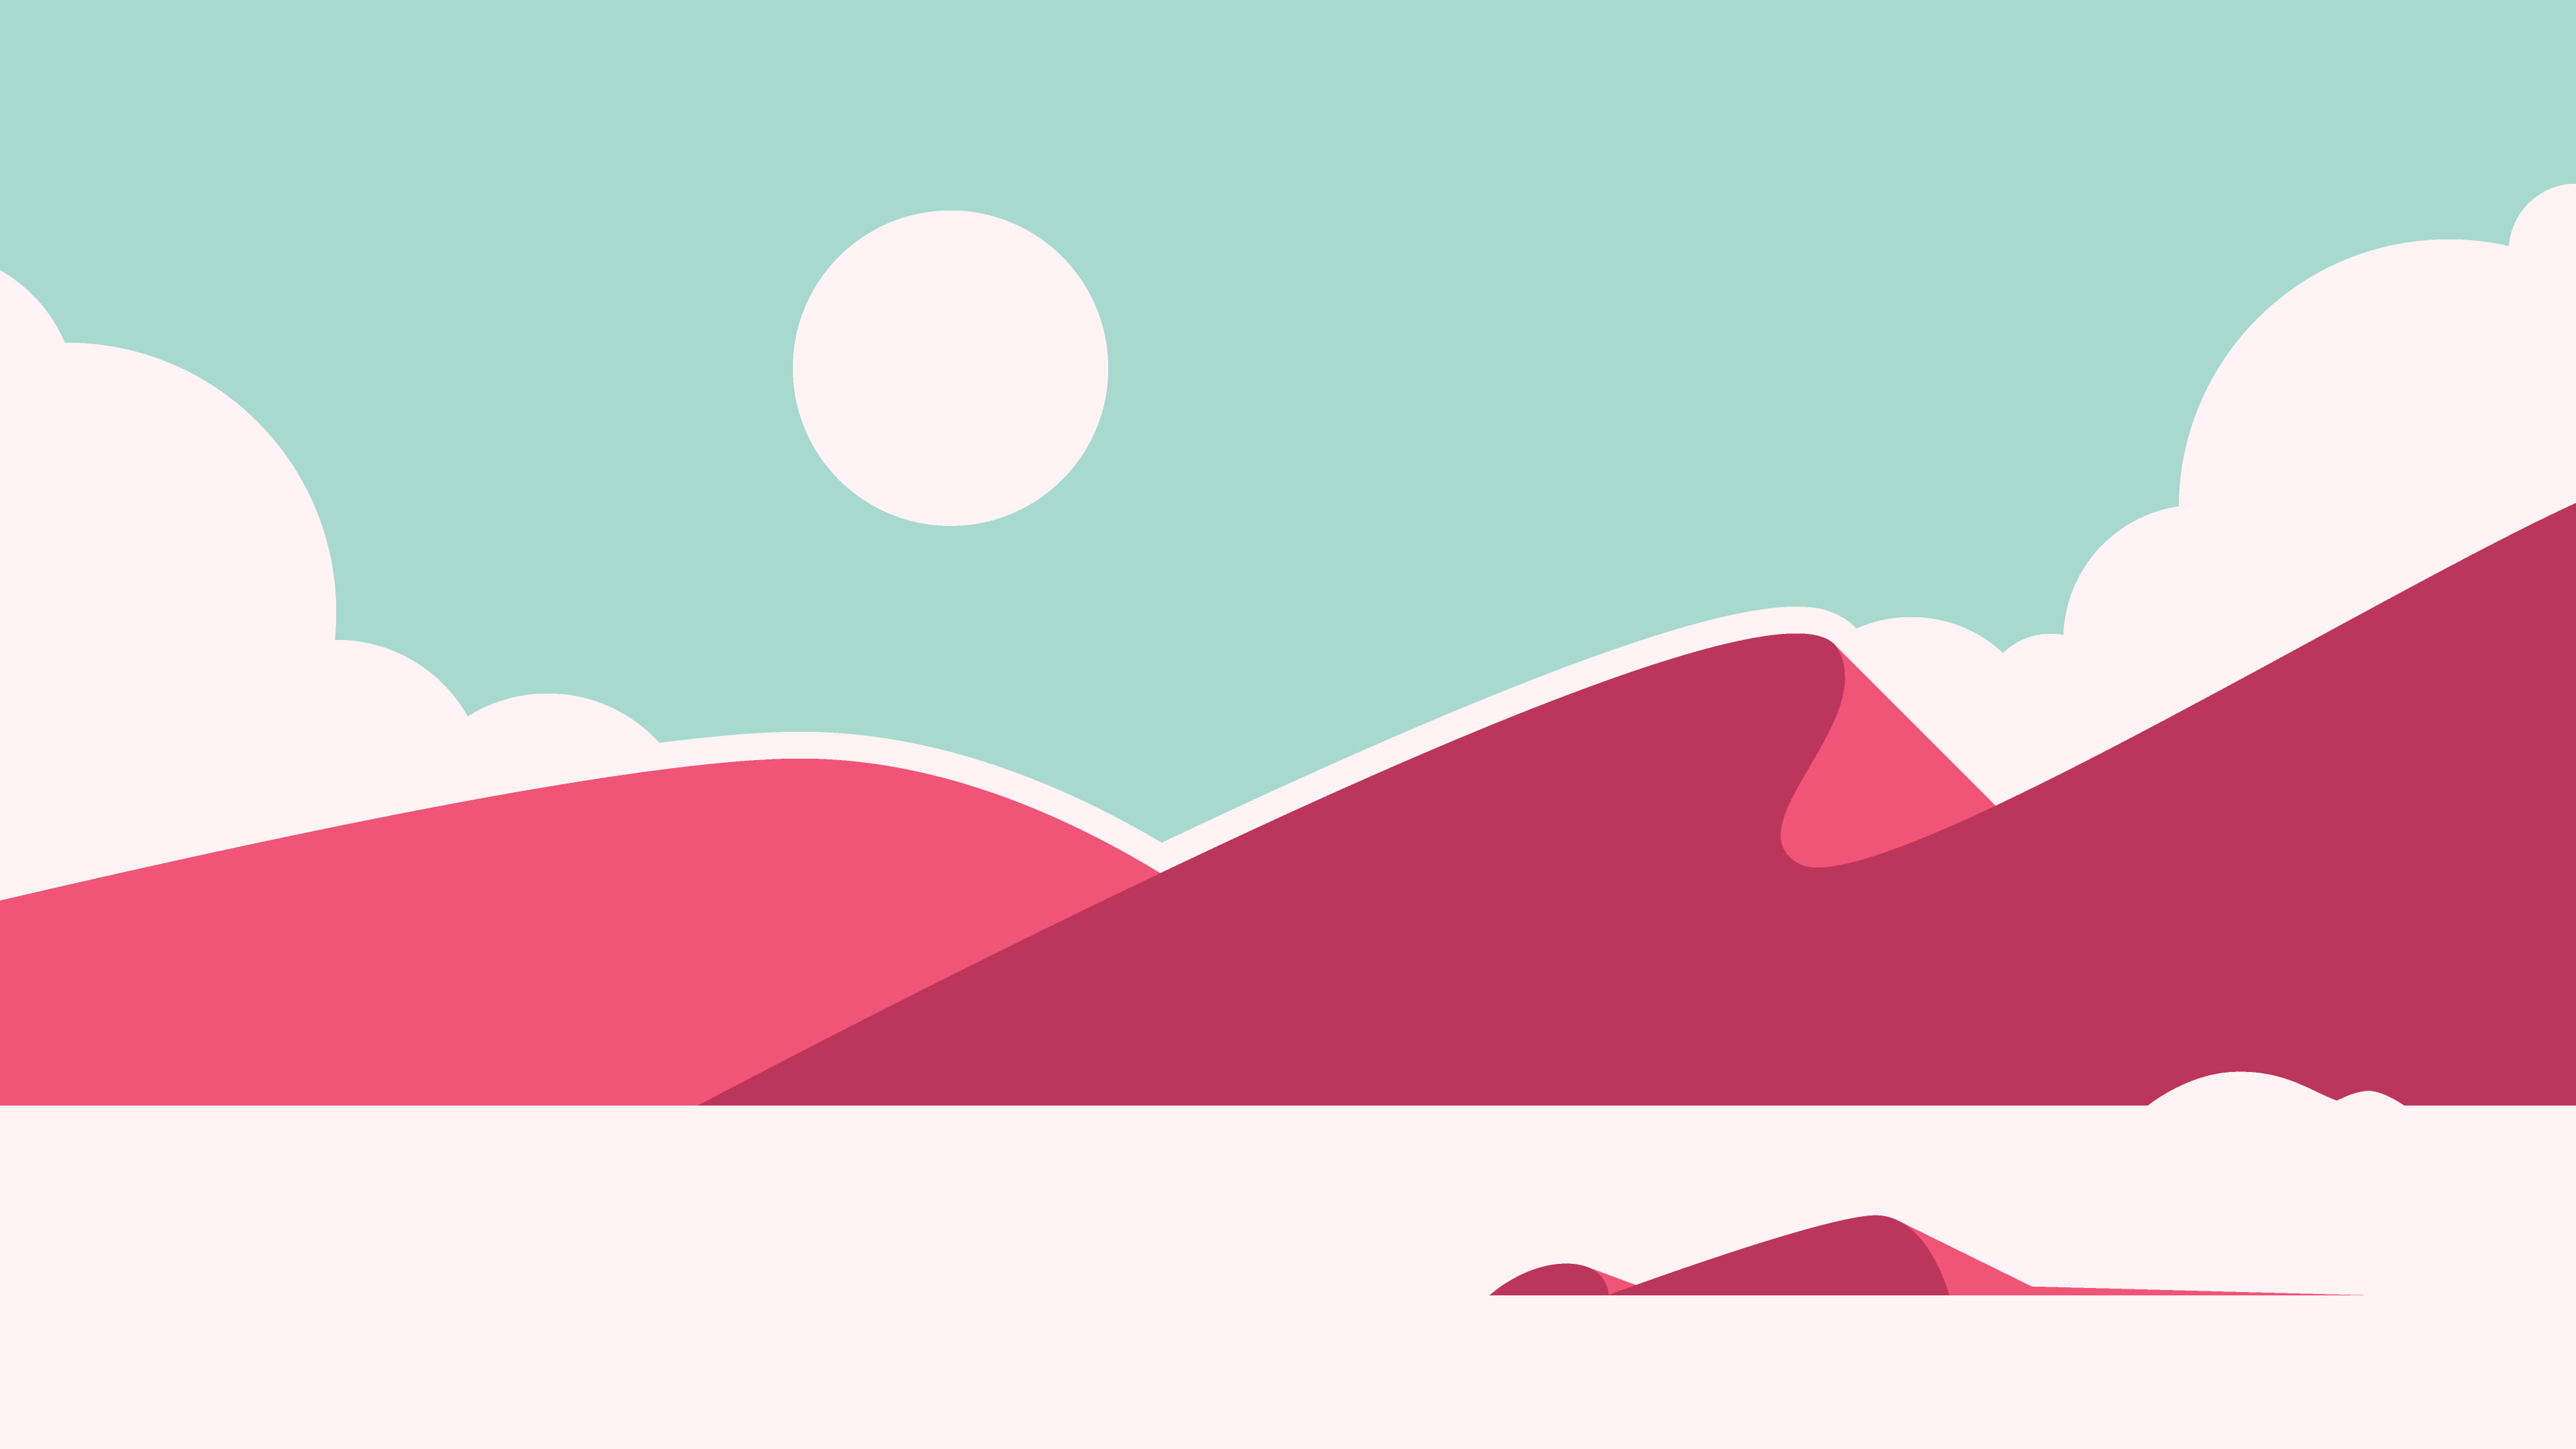 Pink mountain with white full moon illustration HD wallpaper